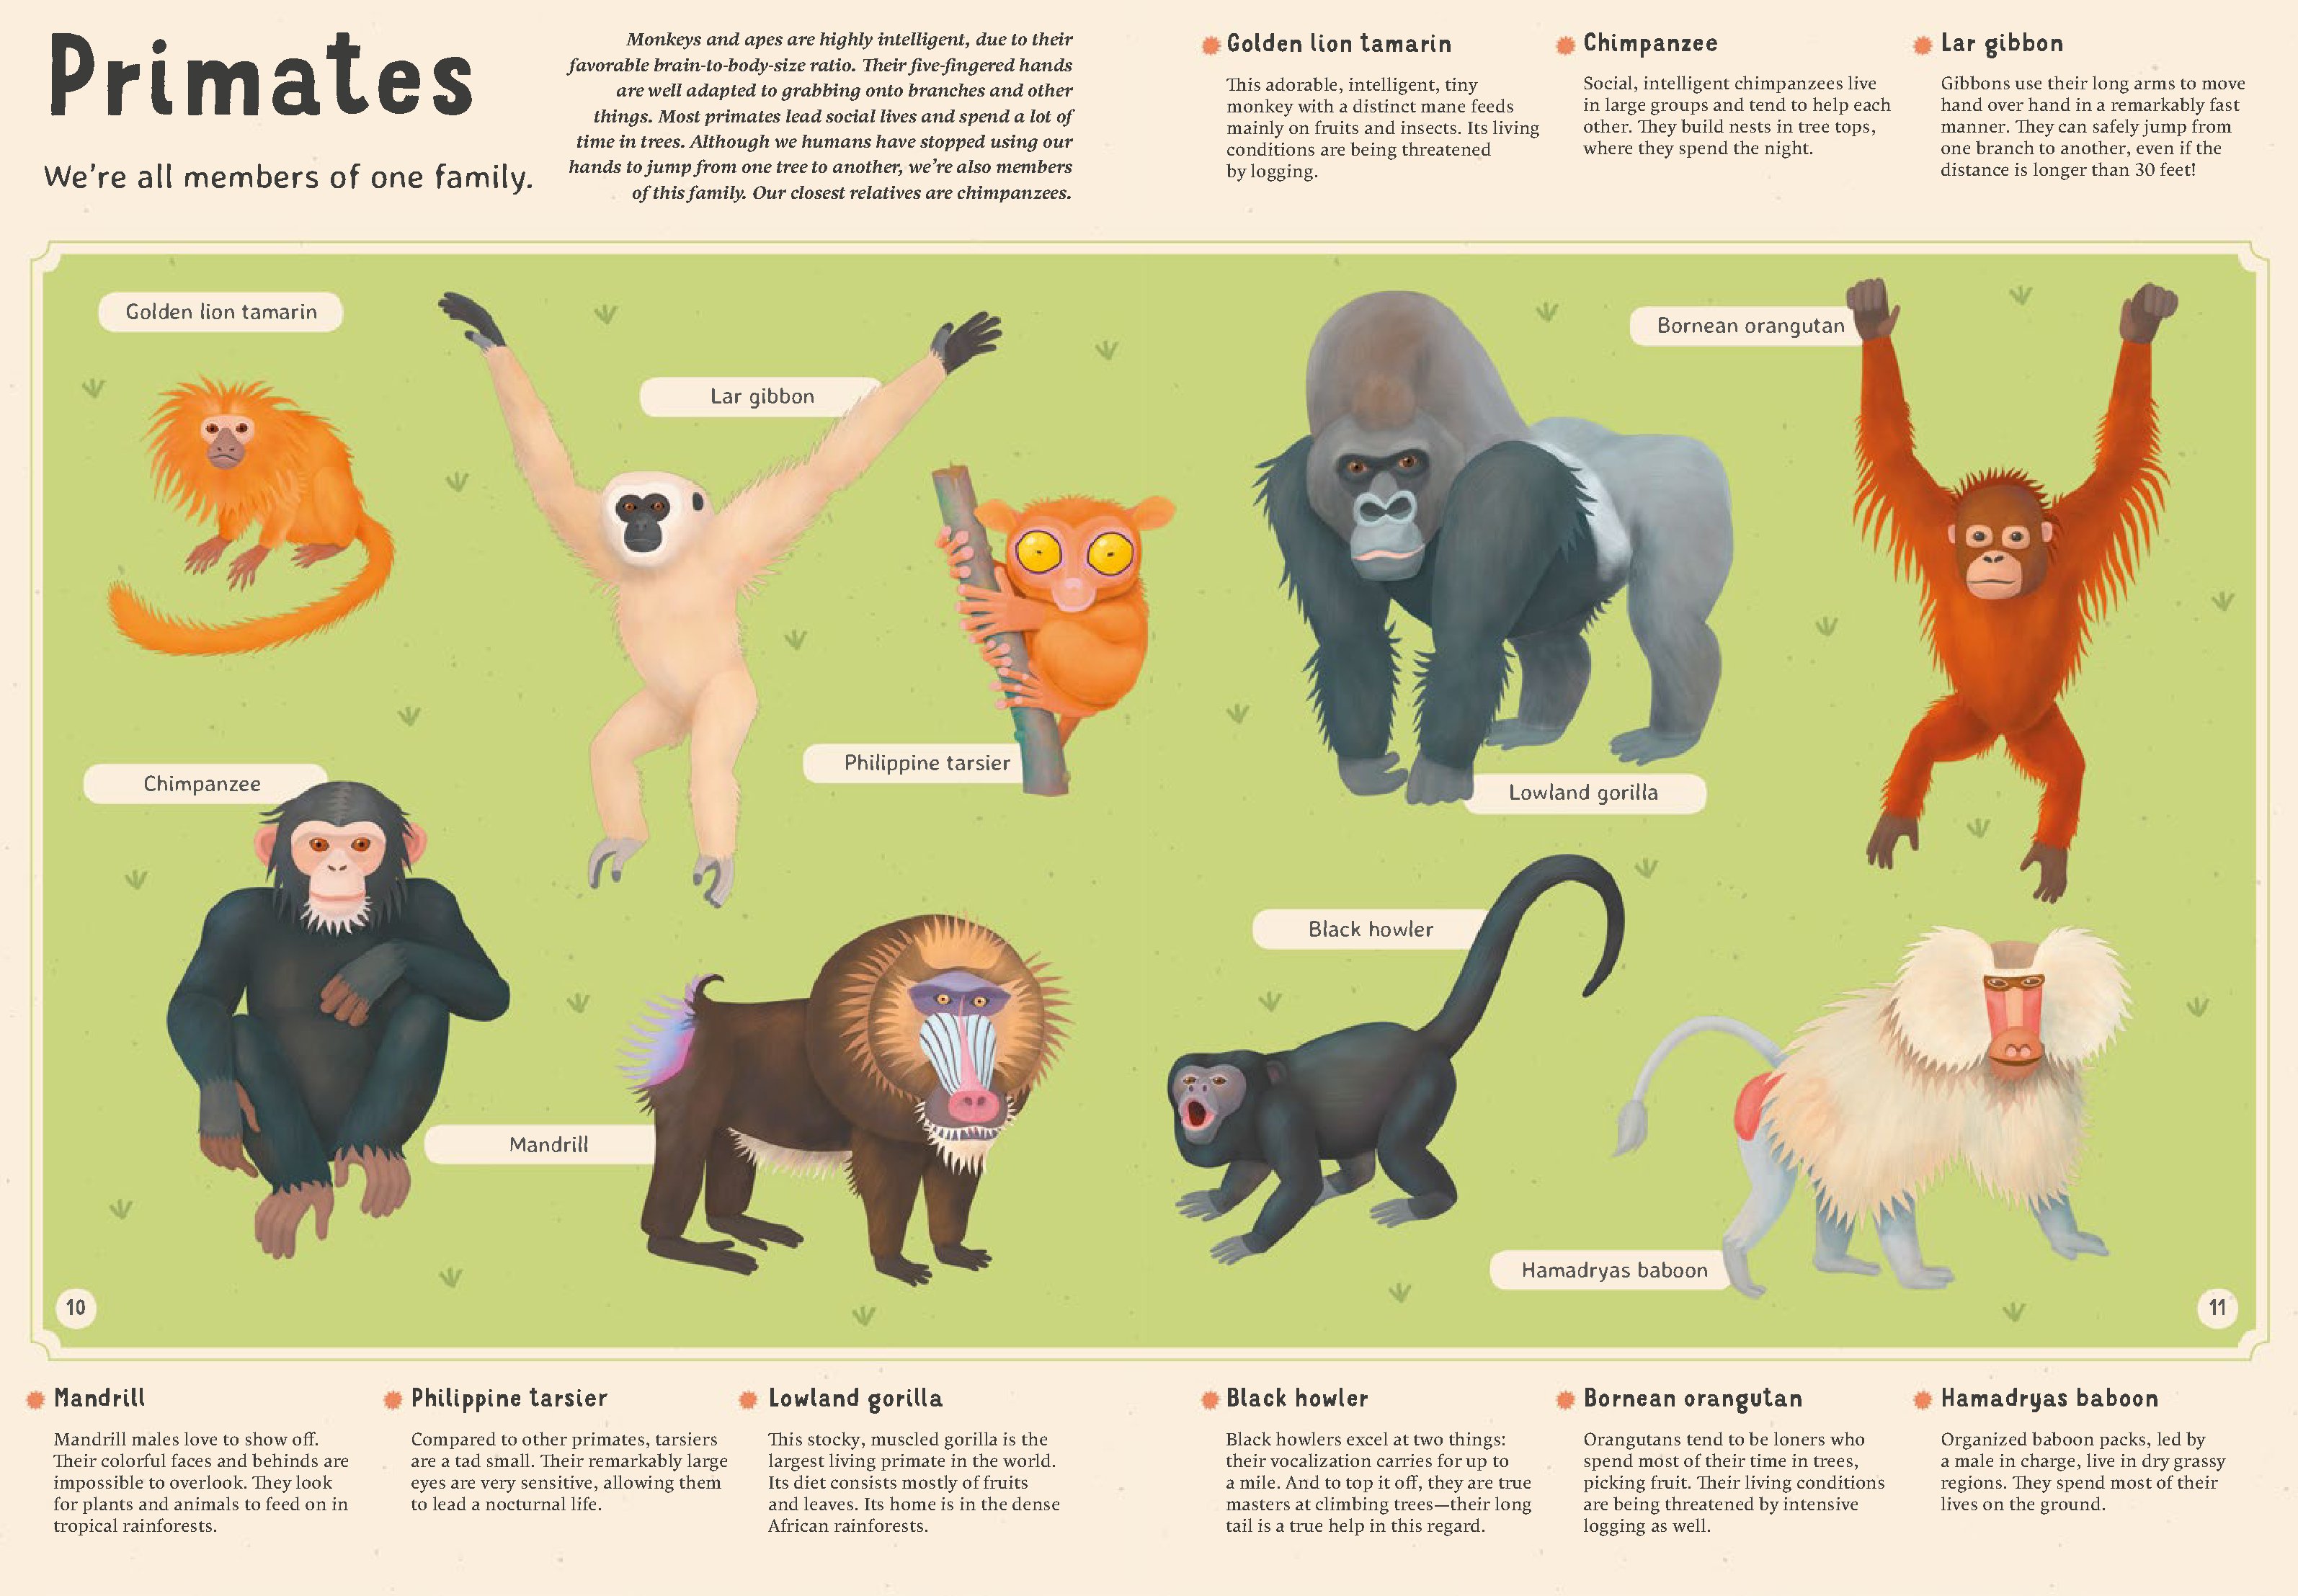 Encyclopedia of Animals for Young Readers